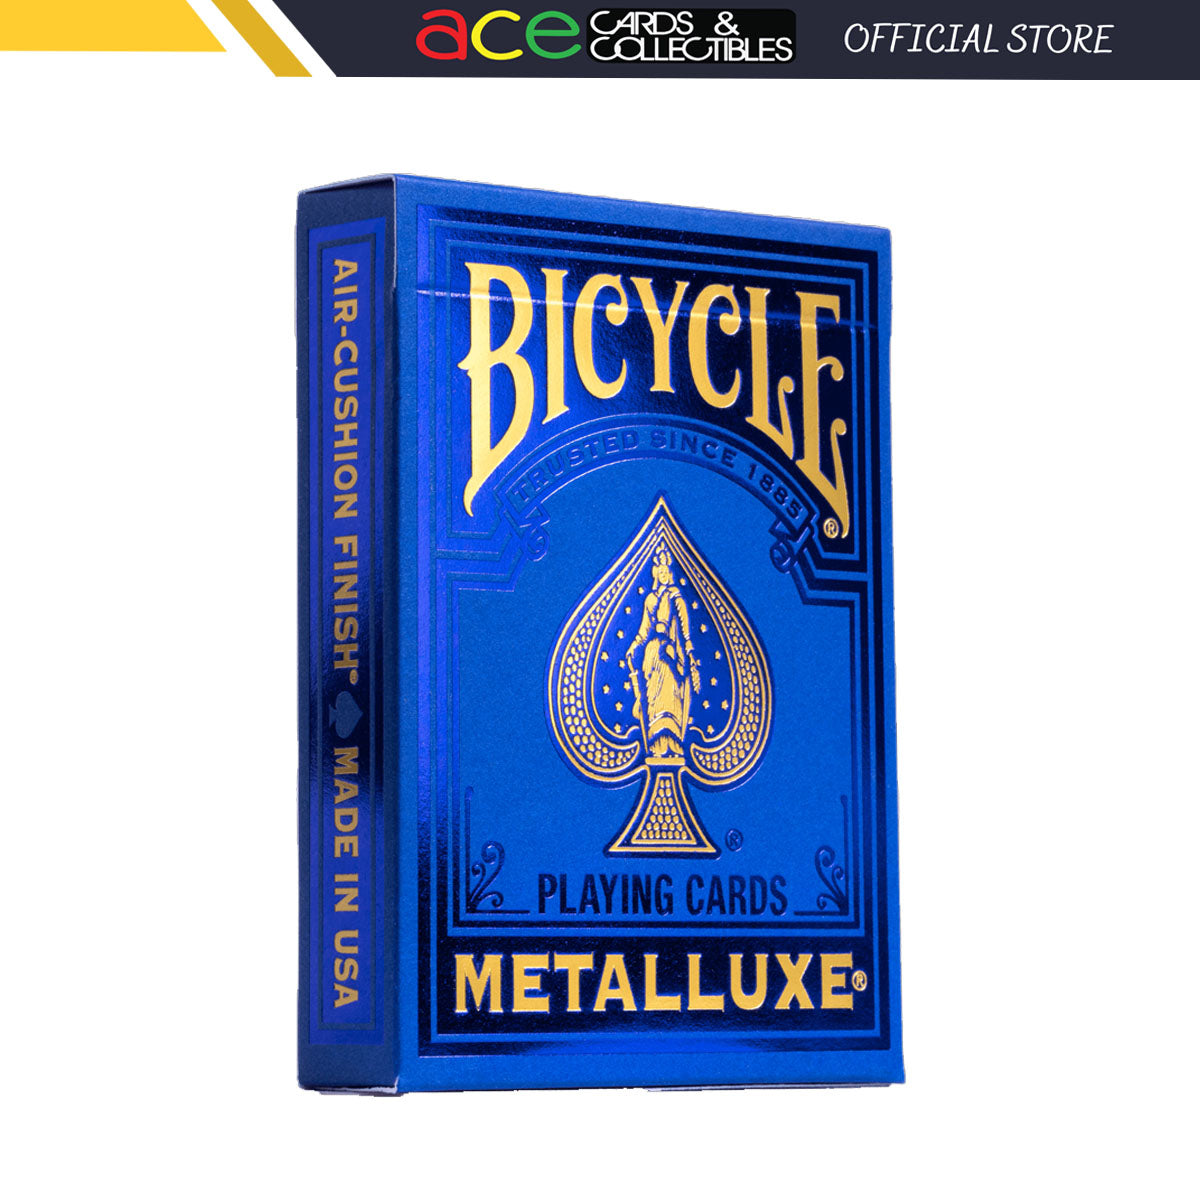 Bicycle Metalluxe Blue Playing Cards-United States Playing Cards Company-Ace Cards & Collectibles